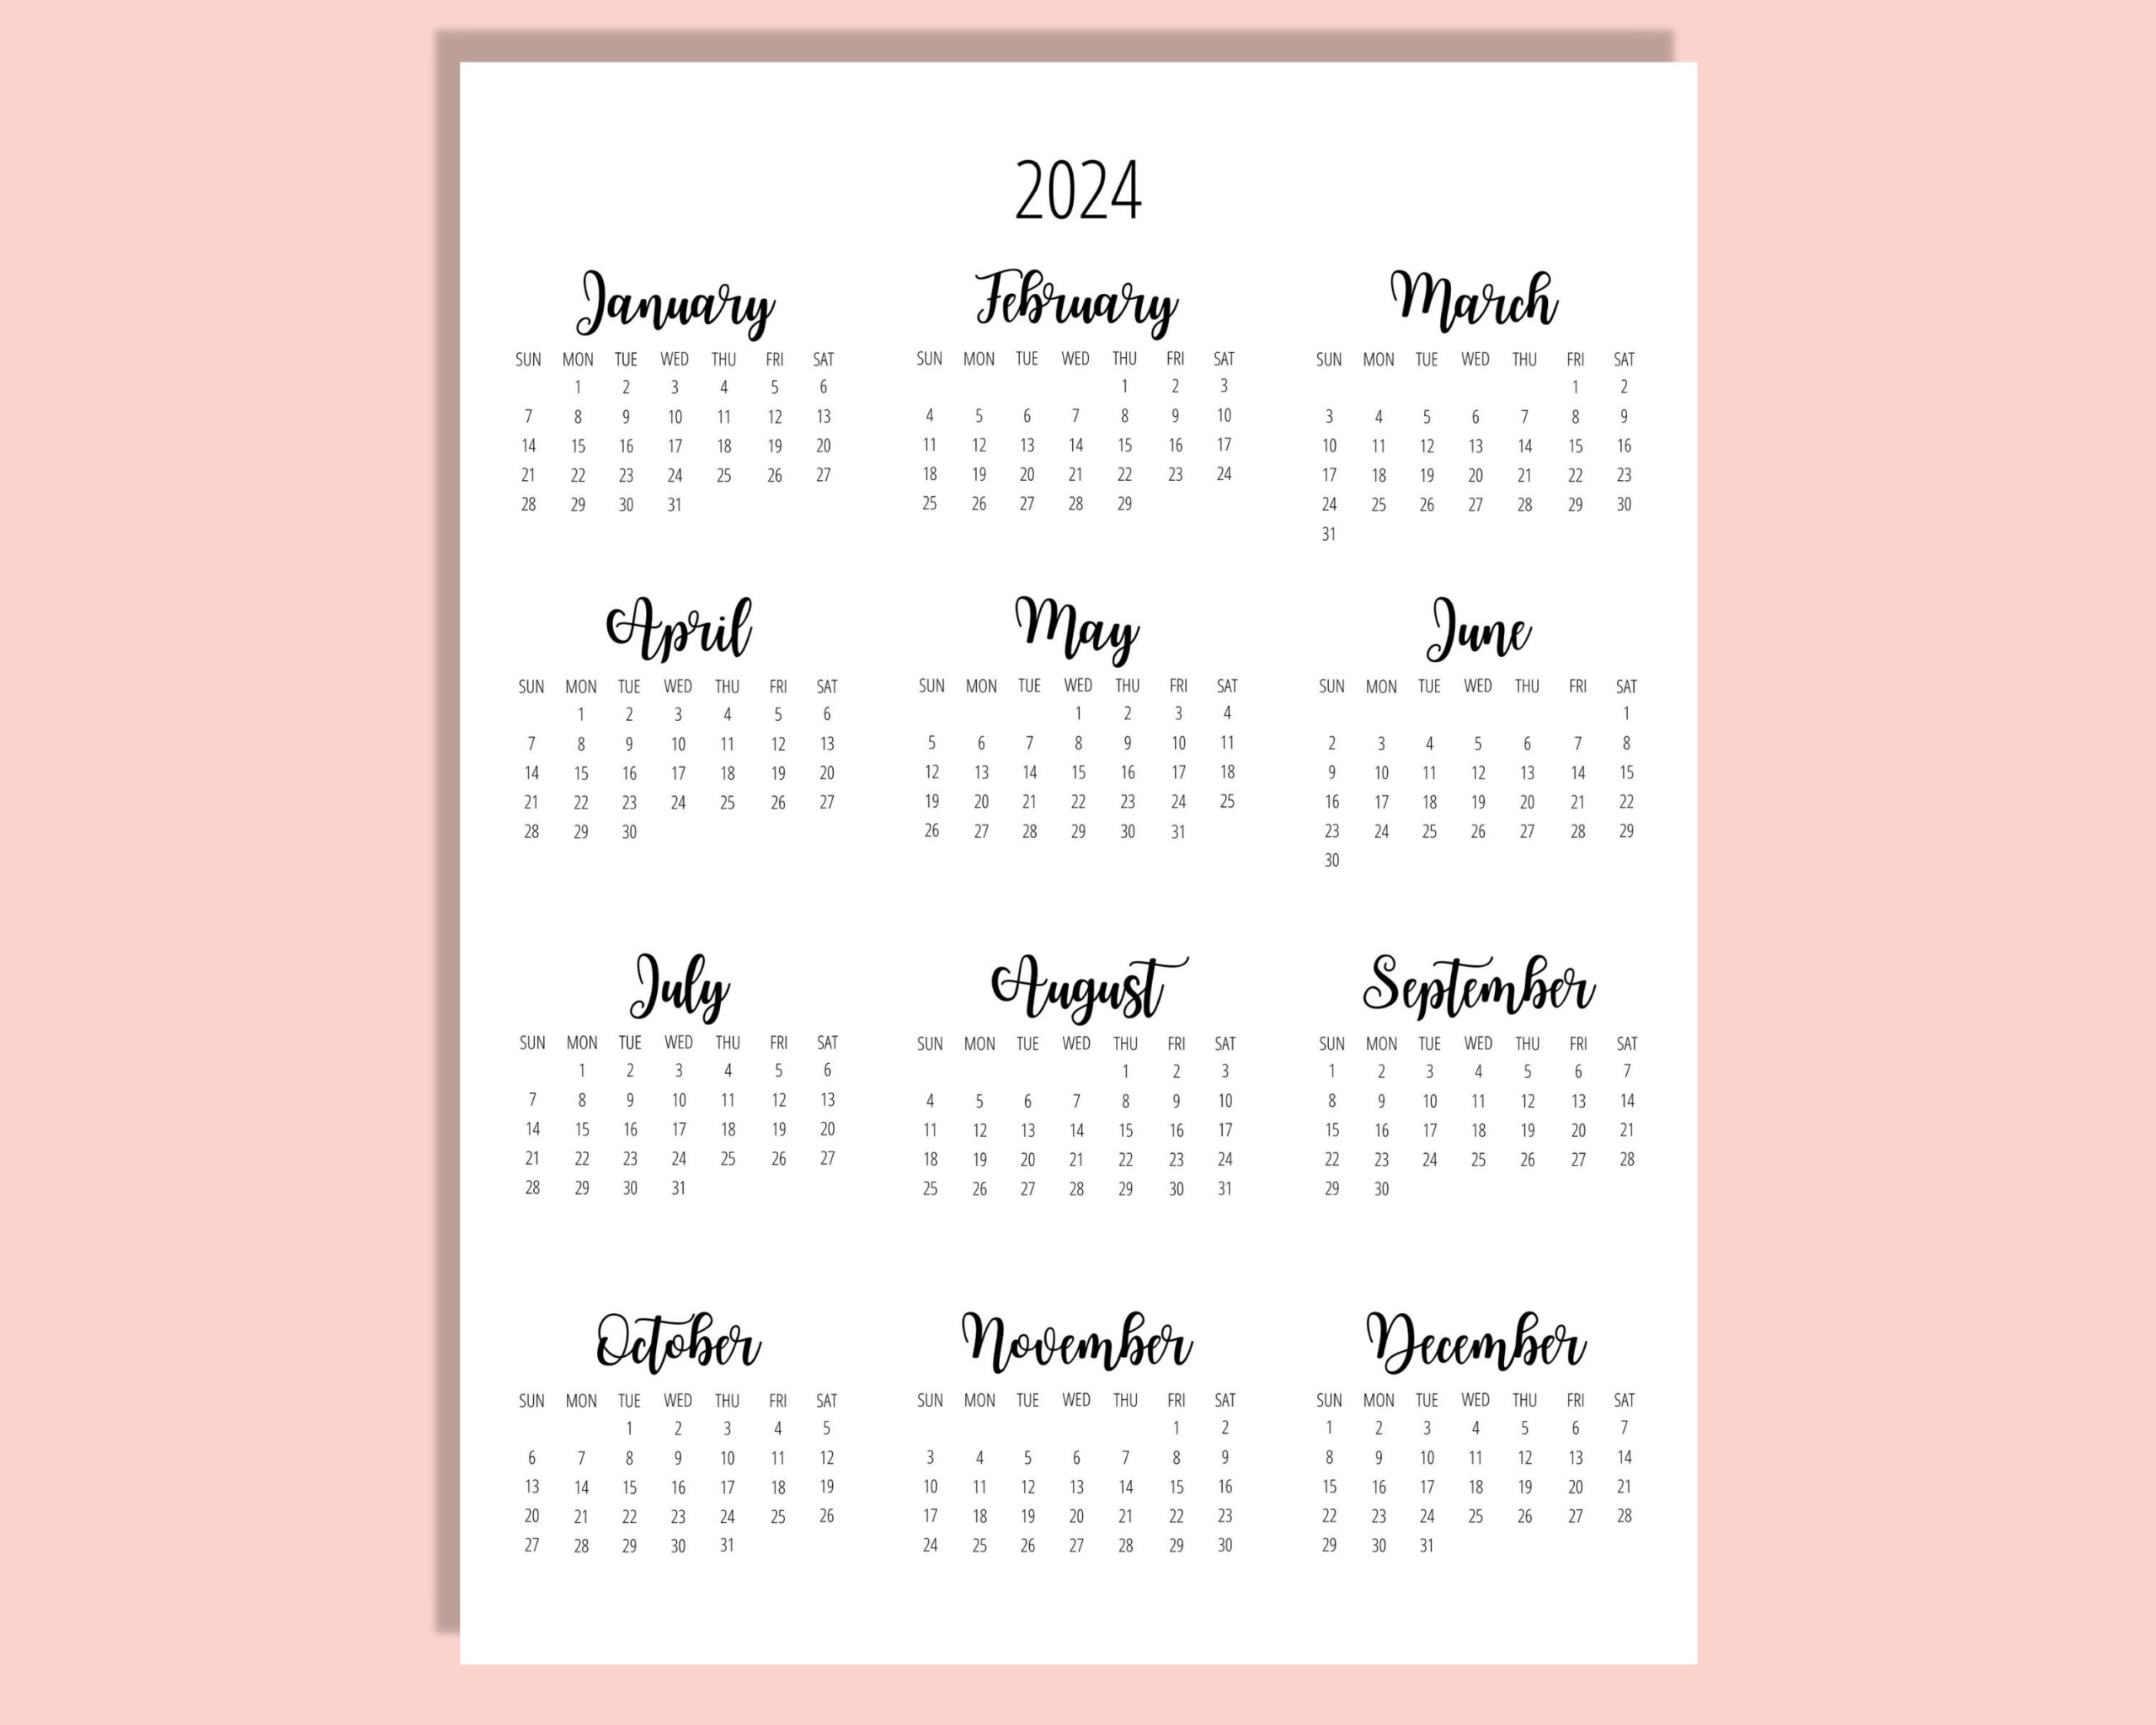 2024 Calendar Template 8.5 X 11 Inches Vertical Year At A - Etsy for 8.5 X 11 Printable Calendar 2024